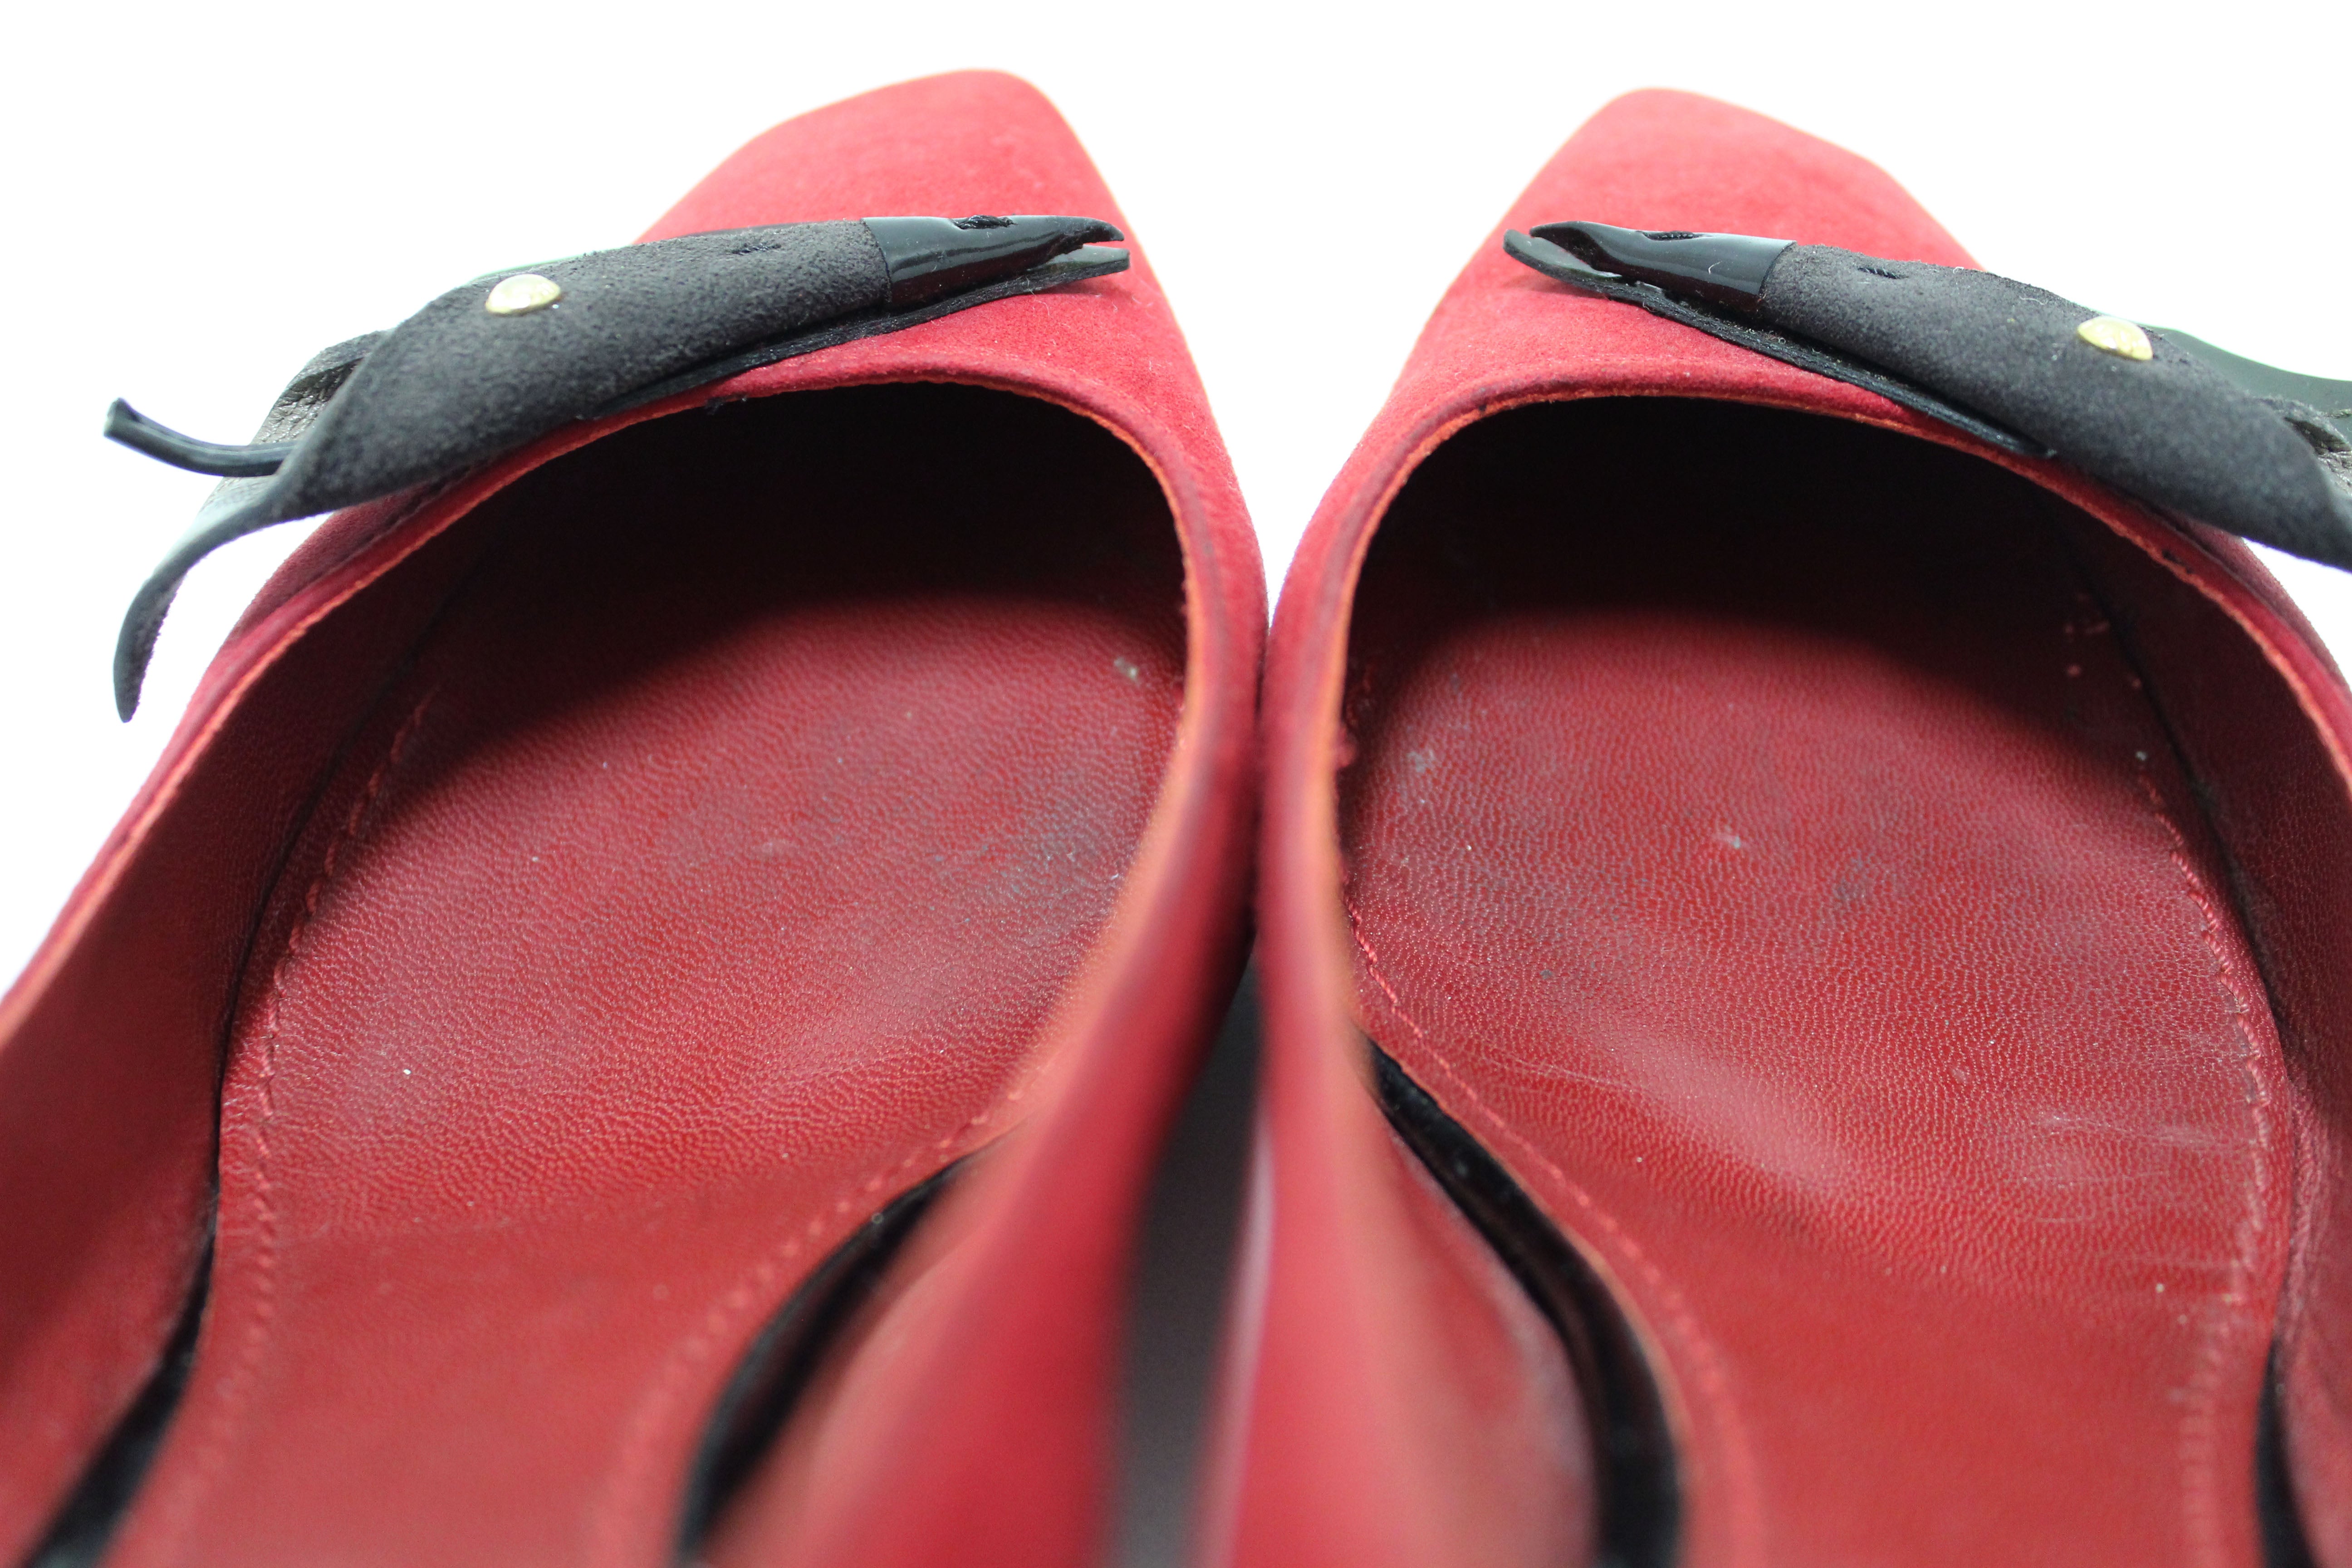 Authentic Louis Vuitton Deep Red Suede Leather Heel Shoes Size 38